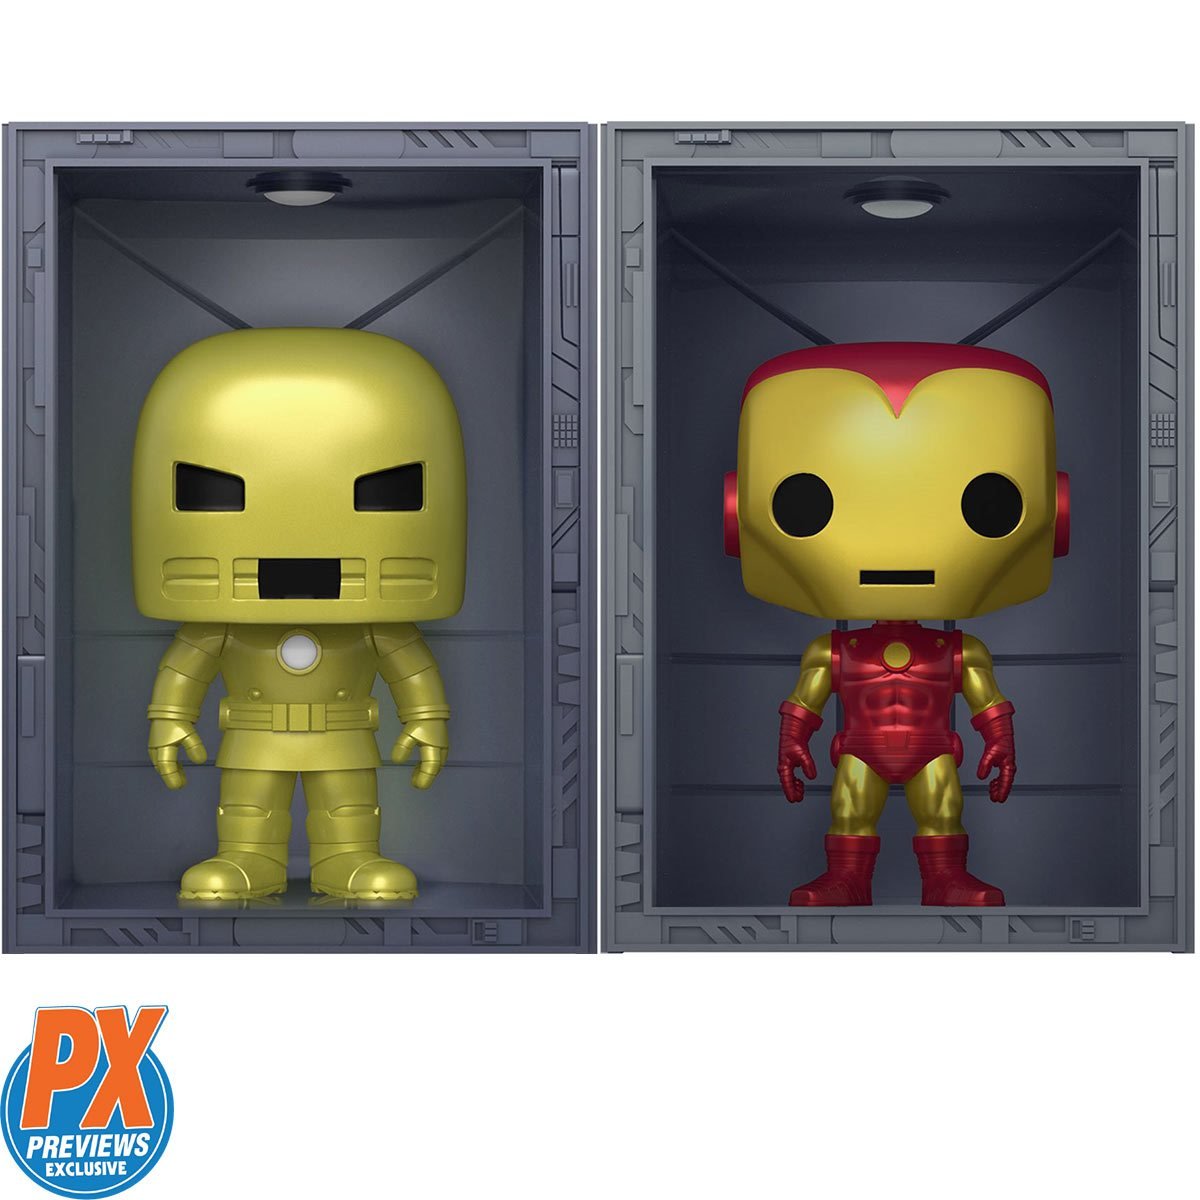 Man Hall of Armor Iron Man Mark 1 and Mark 4 Deluxe Pop! Vinyl Figures - Previews Exclusive Bundle of 2